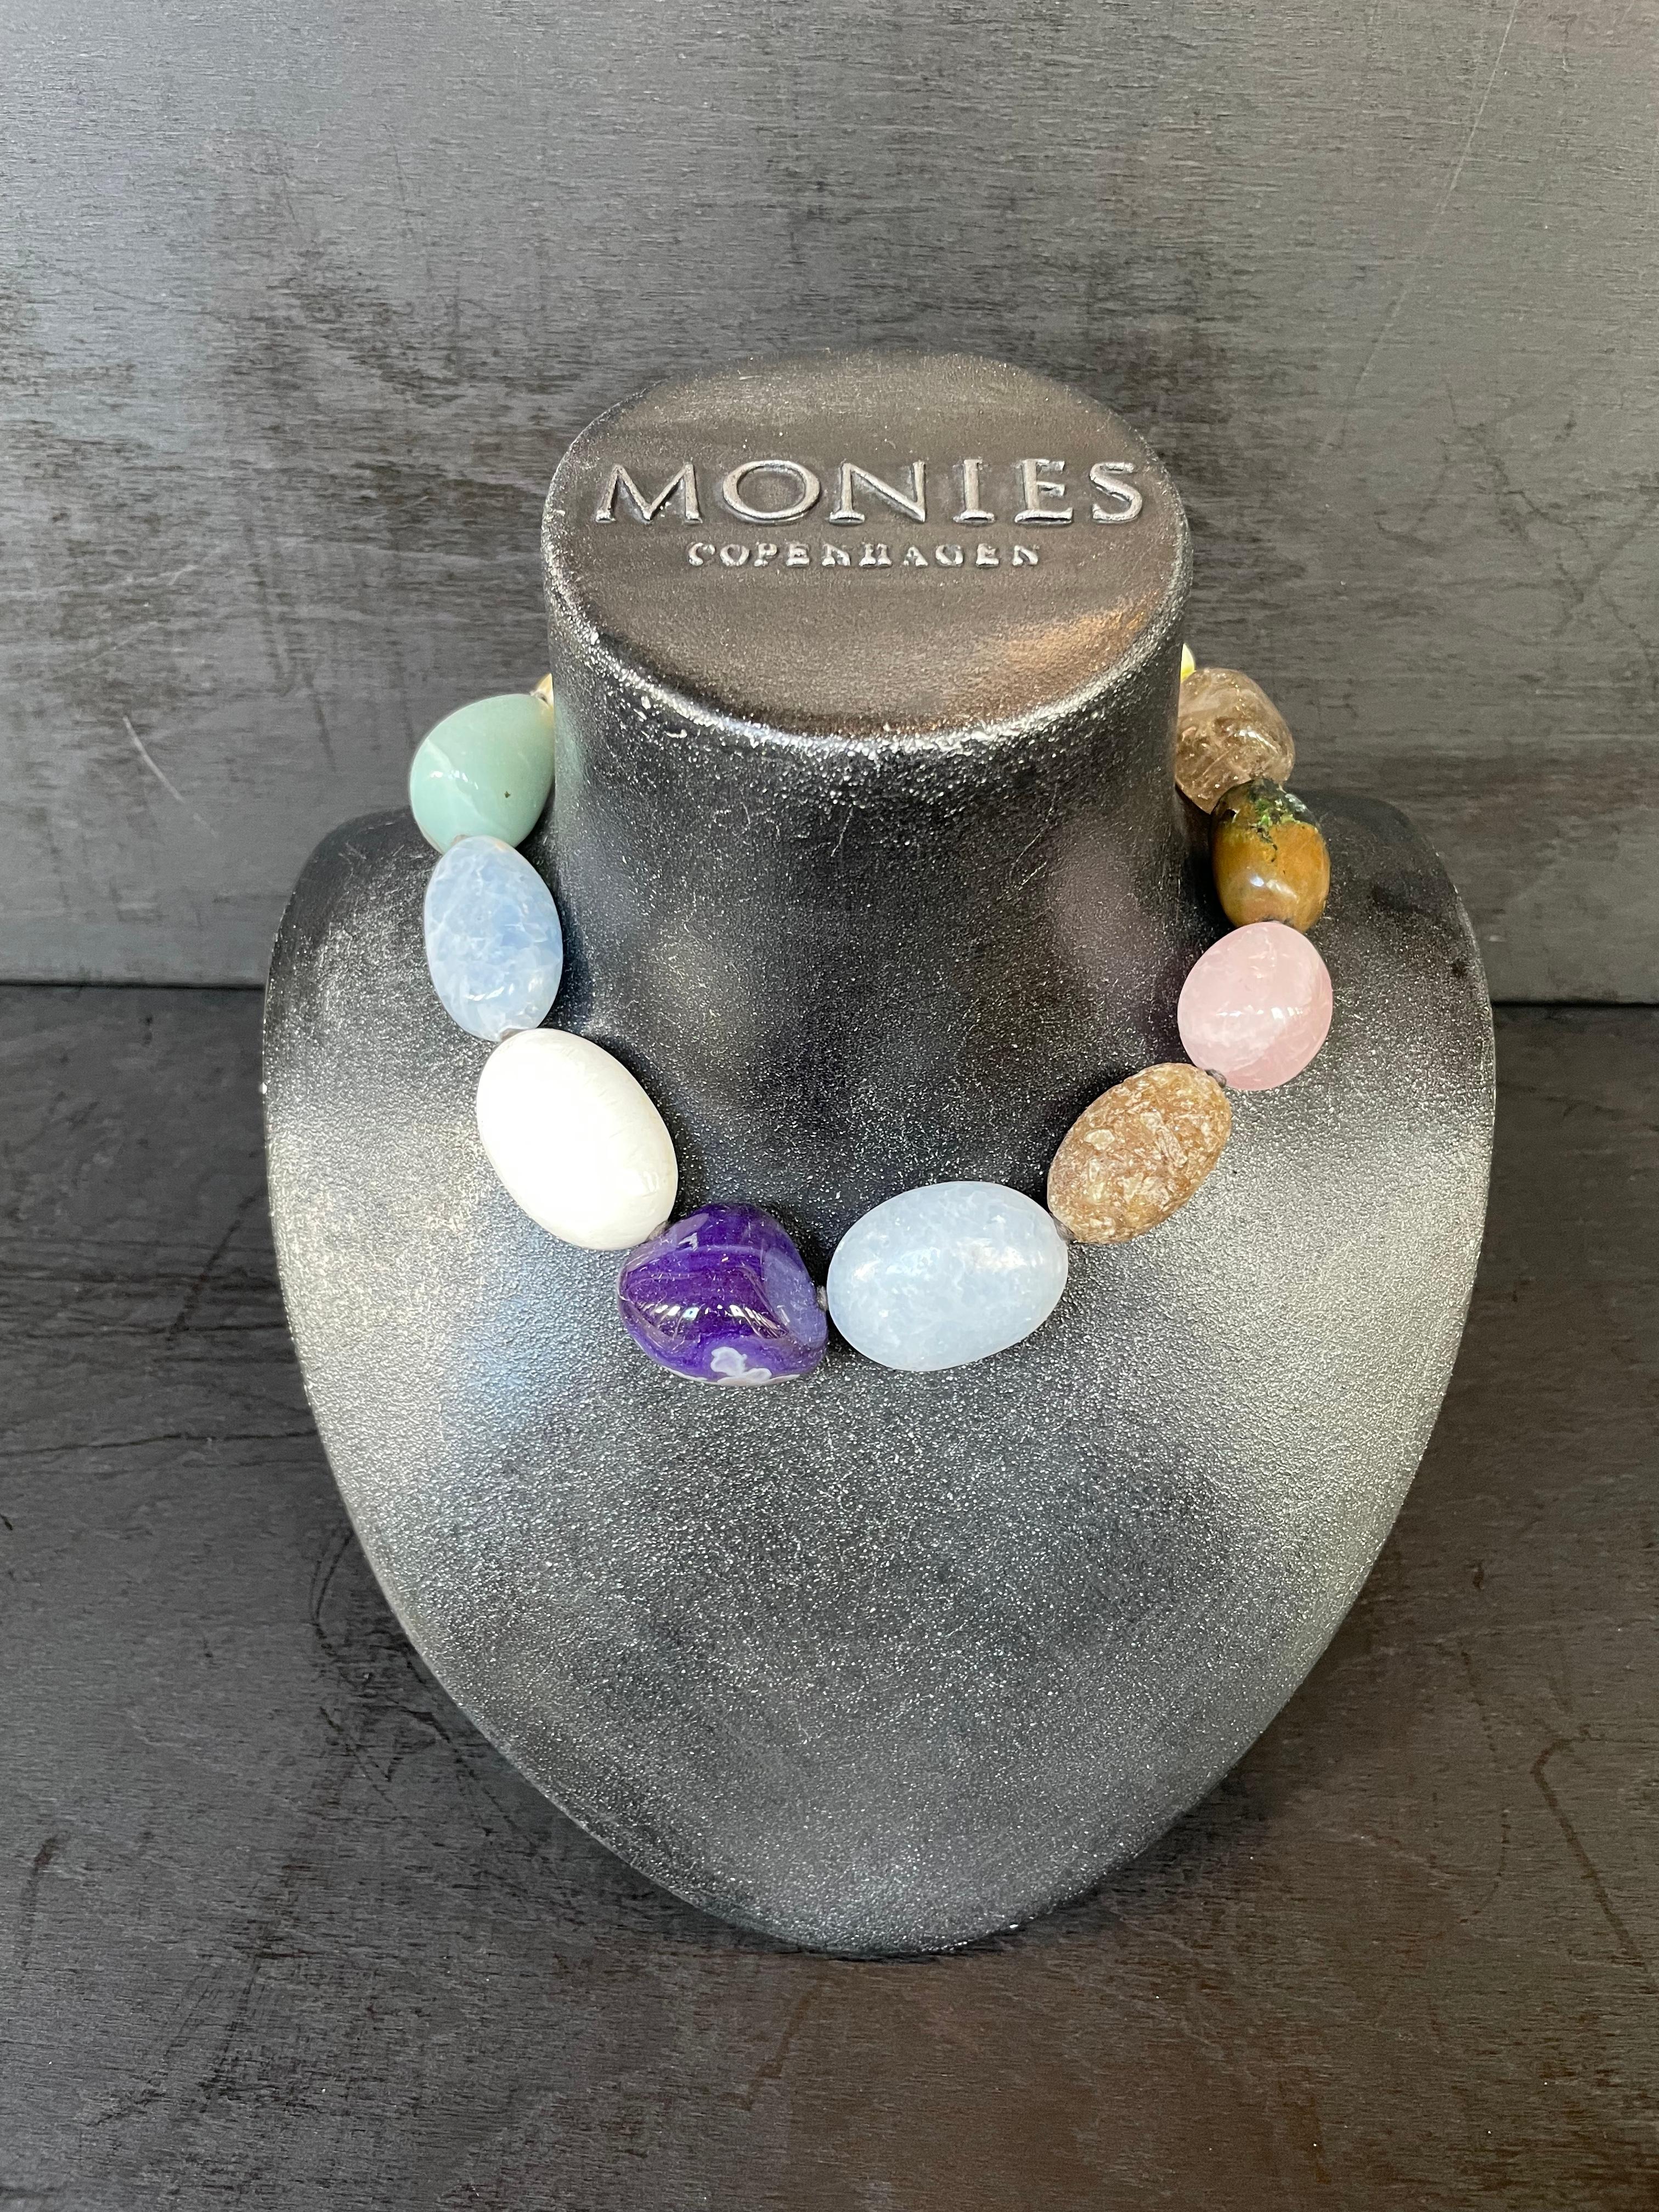 One-of-a-kind statement necklace from the Danish jewellery brand, Monies.
Made in Amethyst, Rose Quartz, Dolomite, Chalcedony and Agate with a leather clasp.

Handcrafted in the Monies Atelier in Copenhagen.